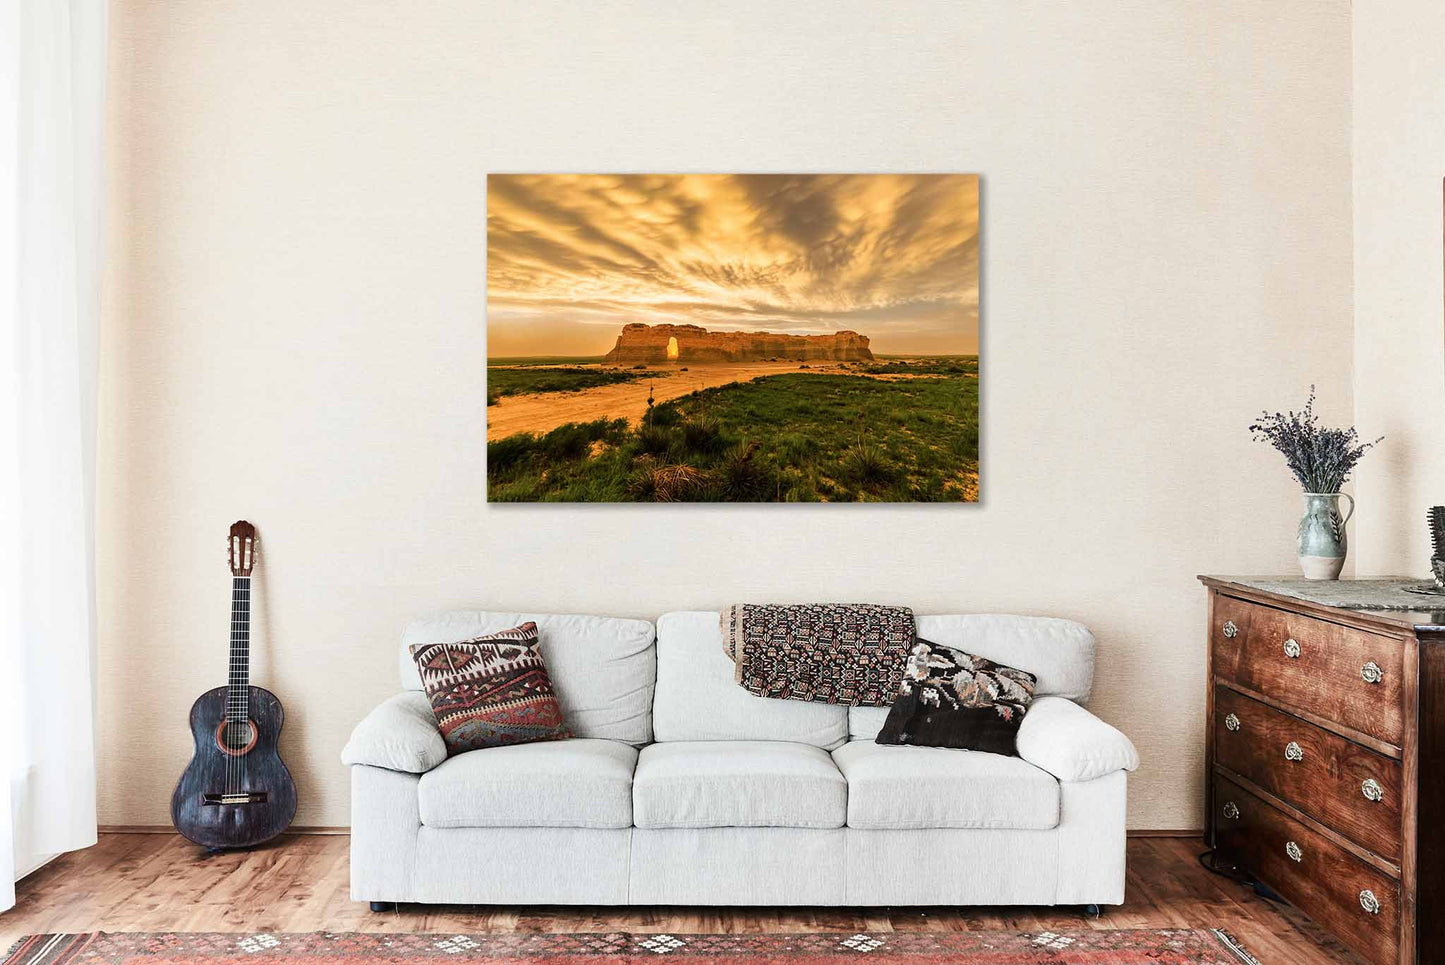 Great Plains Metal Print (Ready to Hang) Photo on Aluminum of Monument Rocks Under Stormy Sky at Sunset in Kansas Prairie Wall Art Western Decor